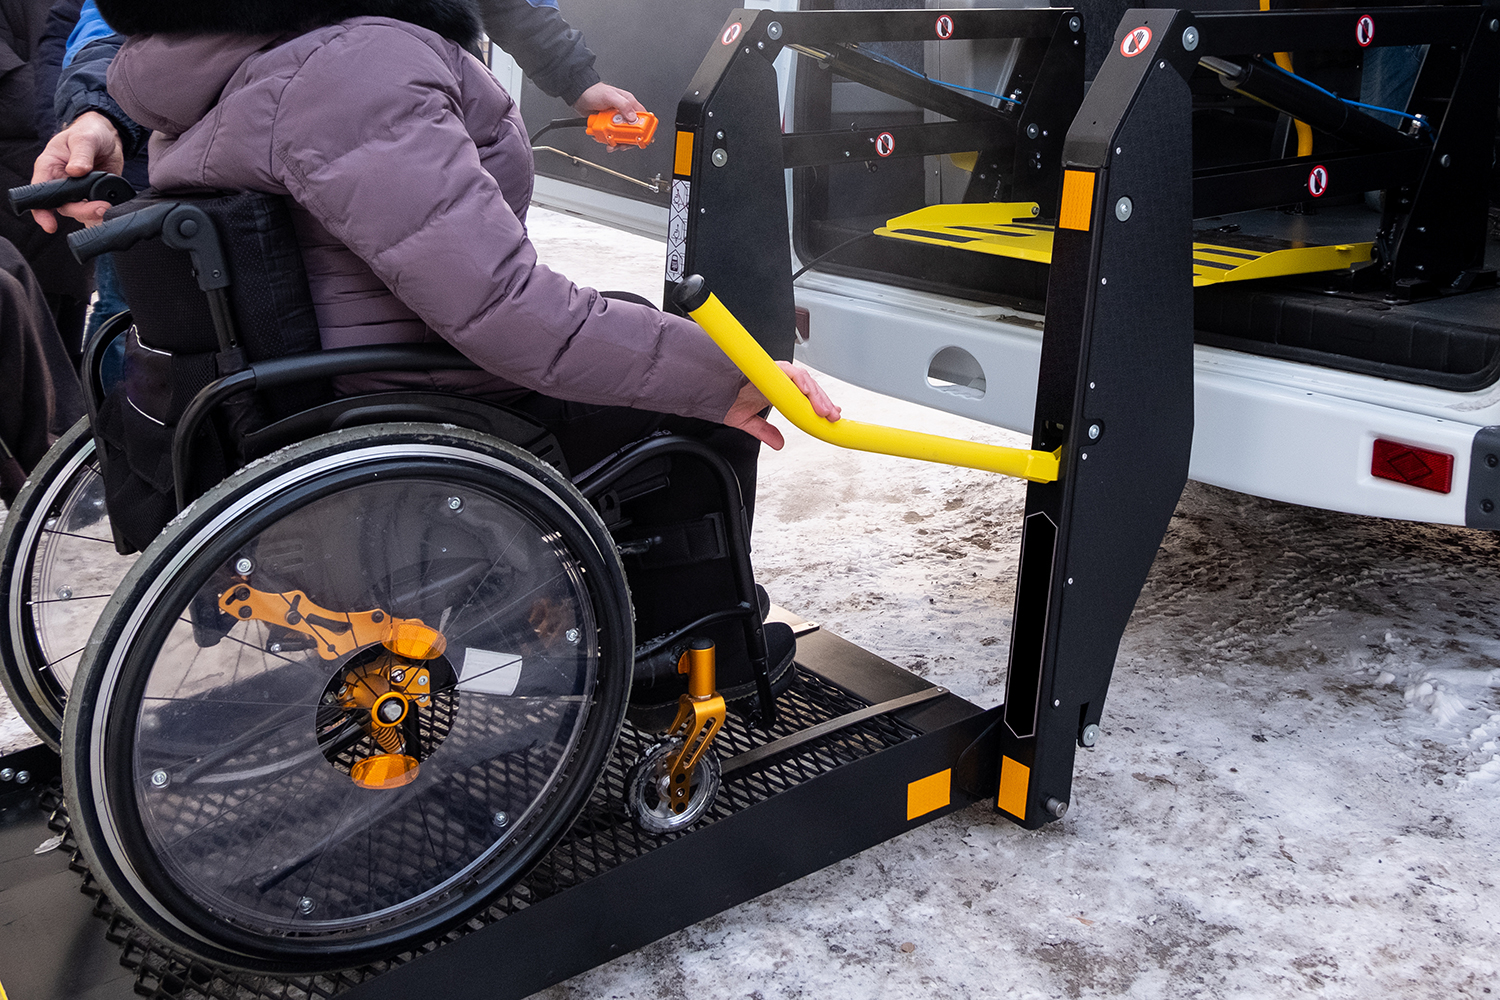 How The Next Generation Mobility Products Changed The Way Disabled People Travel